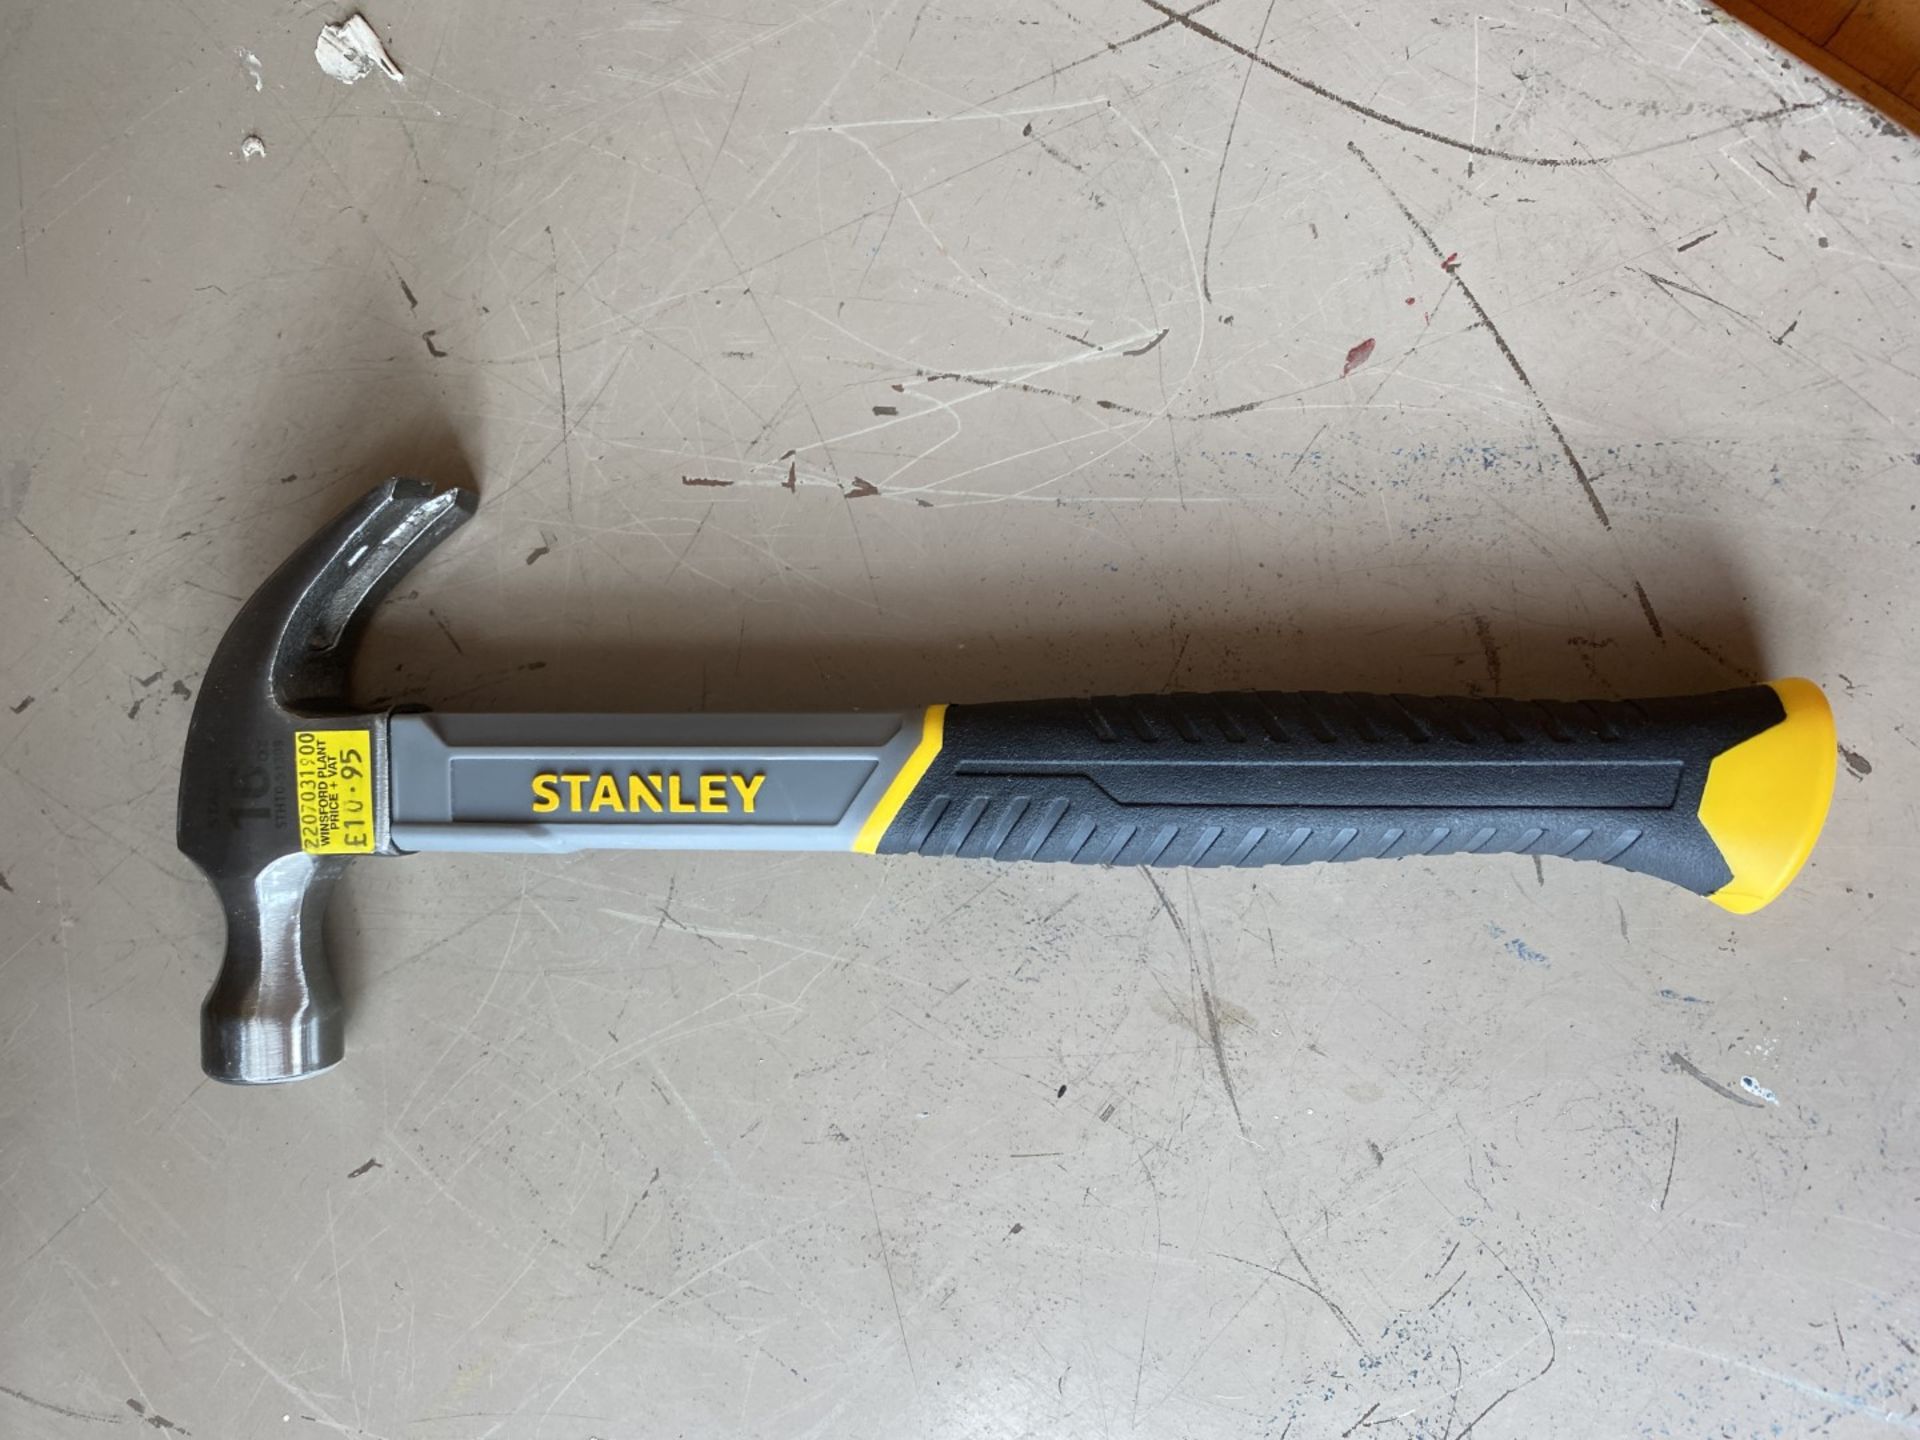 NEW Stanley 16oz curved claw hammer, RRP £10.95